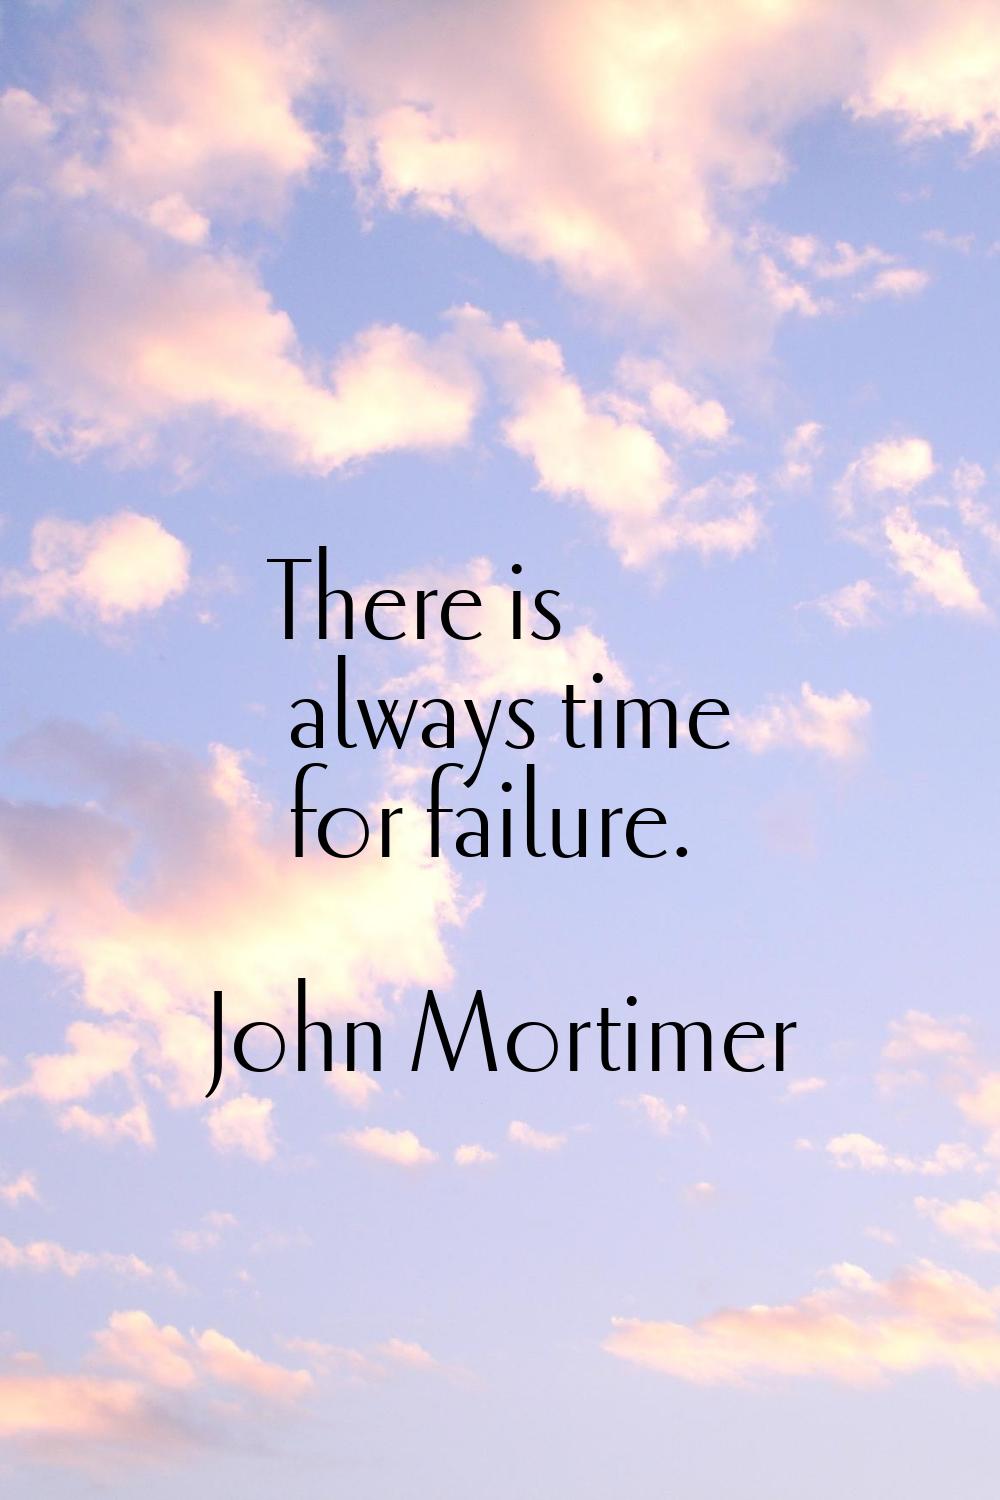 There is always time for failure.